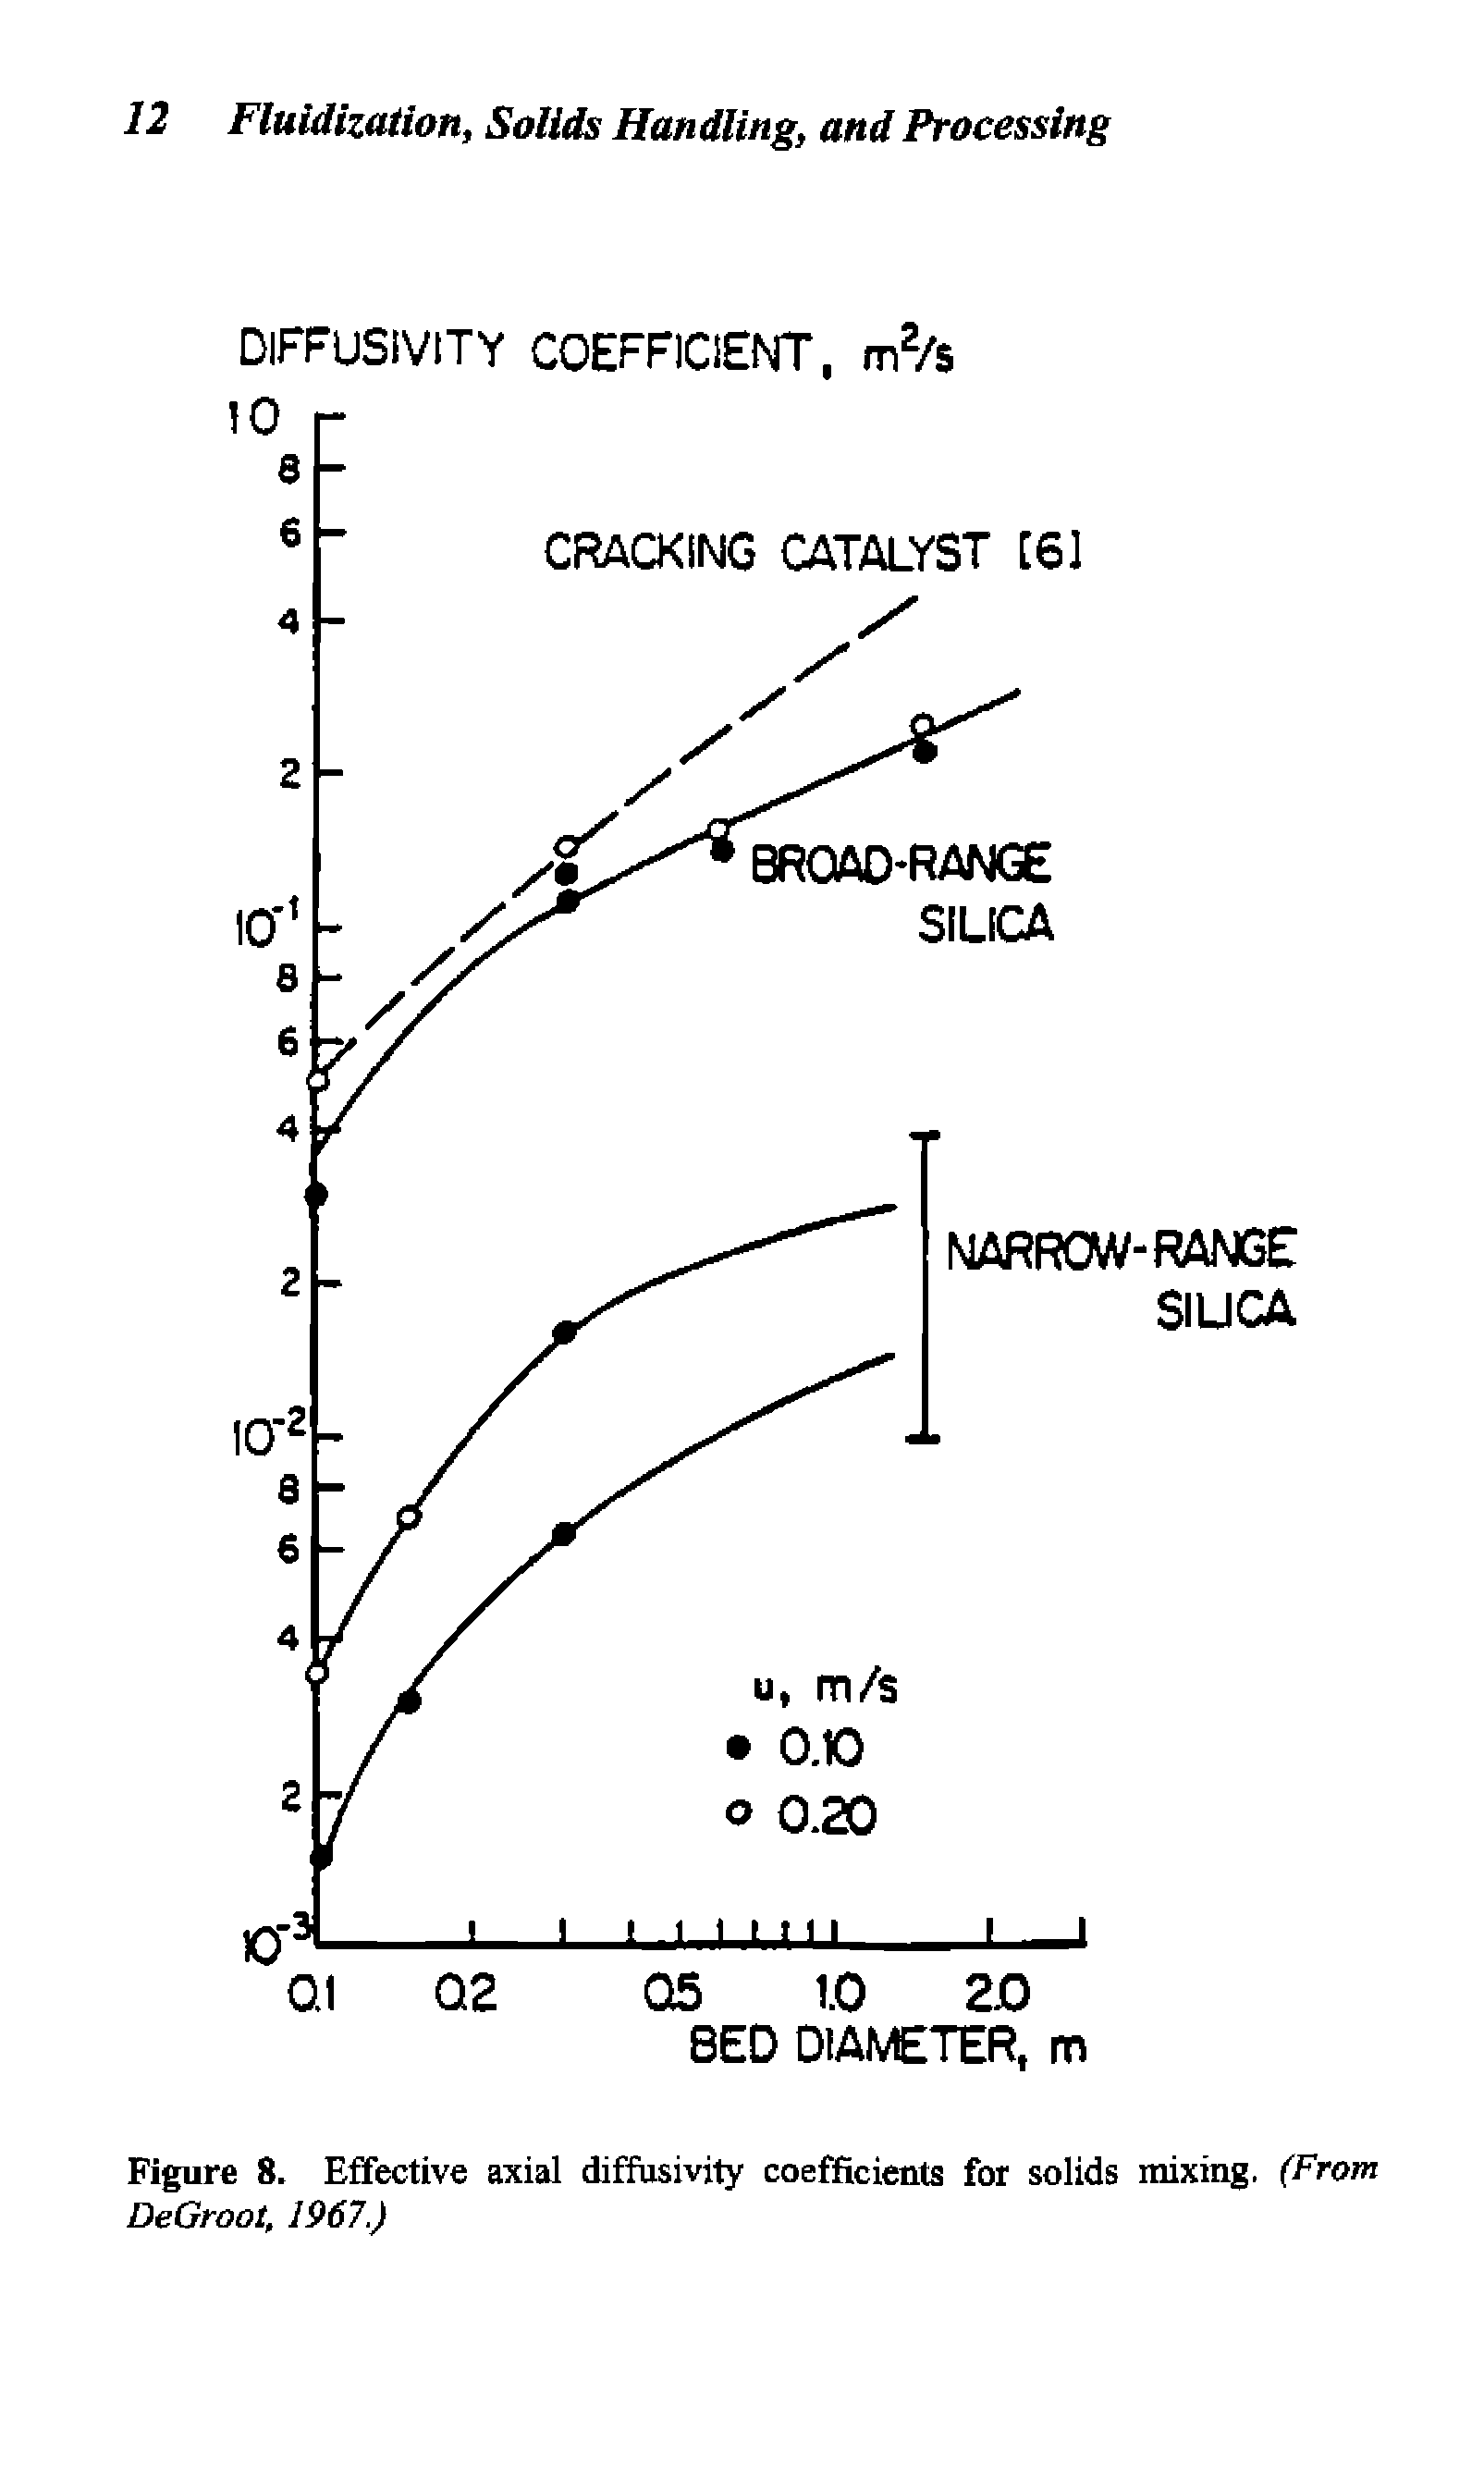 Figure 8. Effective axial diffusivity coefficients for solids mixing, (From DeGroot, 1967.)...